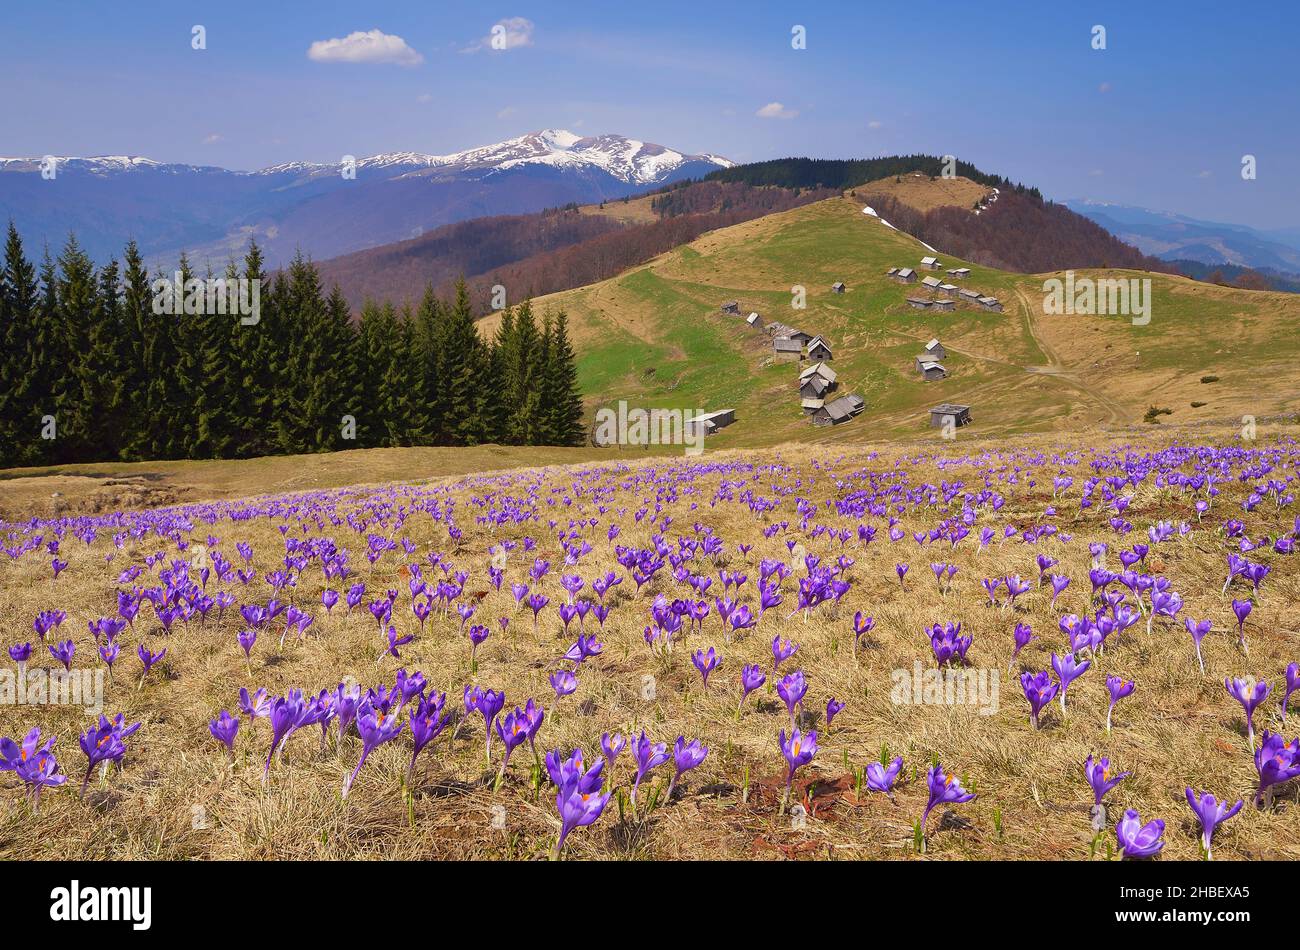 Flowering meadow in the mountains. Spring landscape with flowers of crocuses. Sunny day. Alpine settlement of shepherds with wooden houses. Carpathian Stock Photo